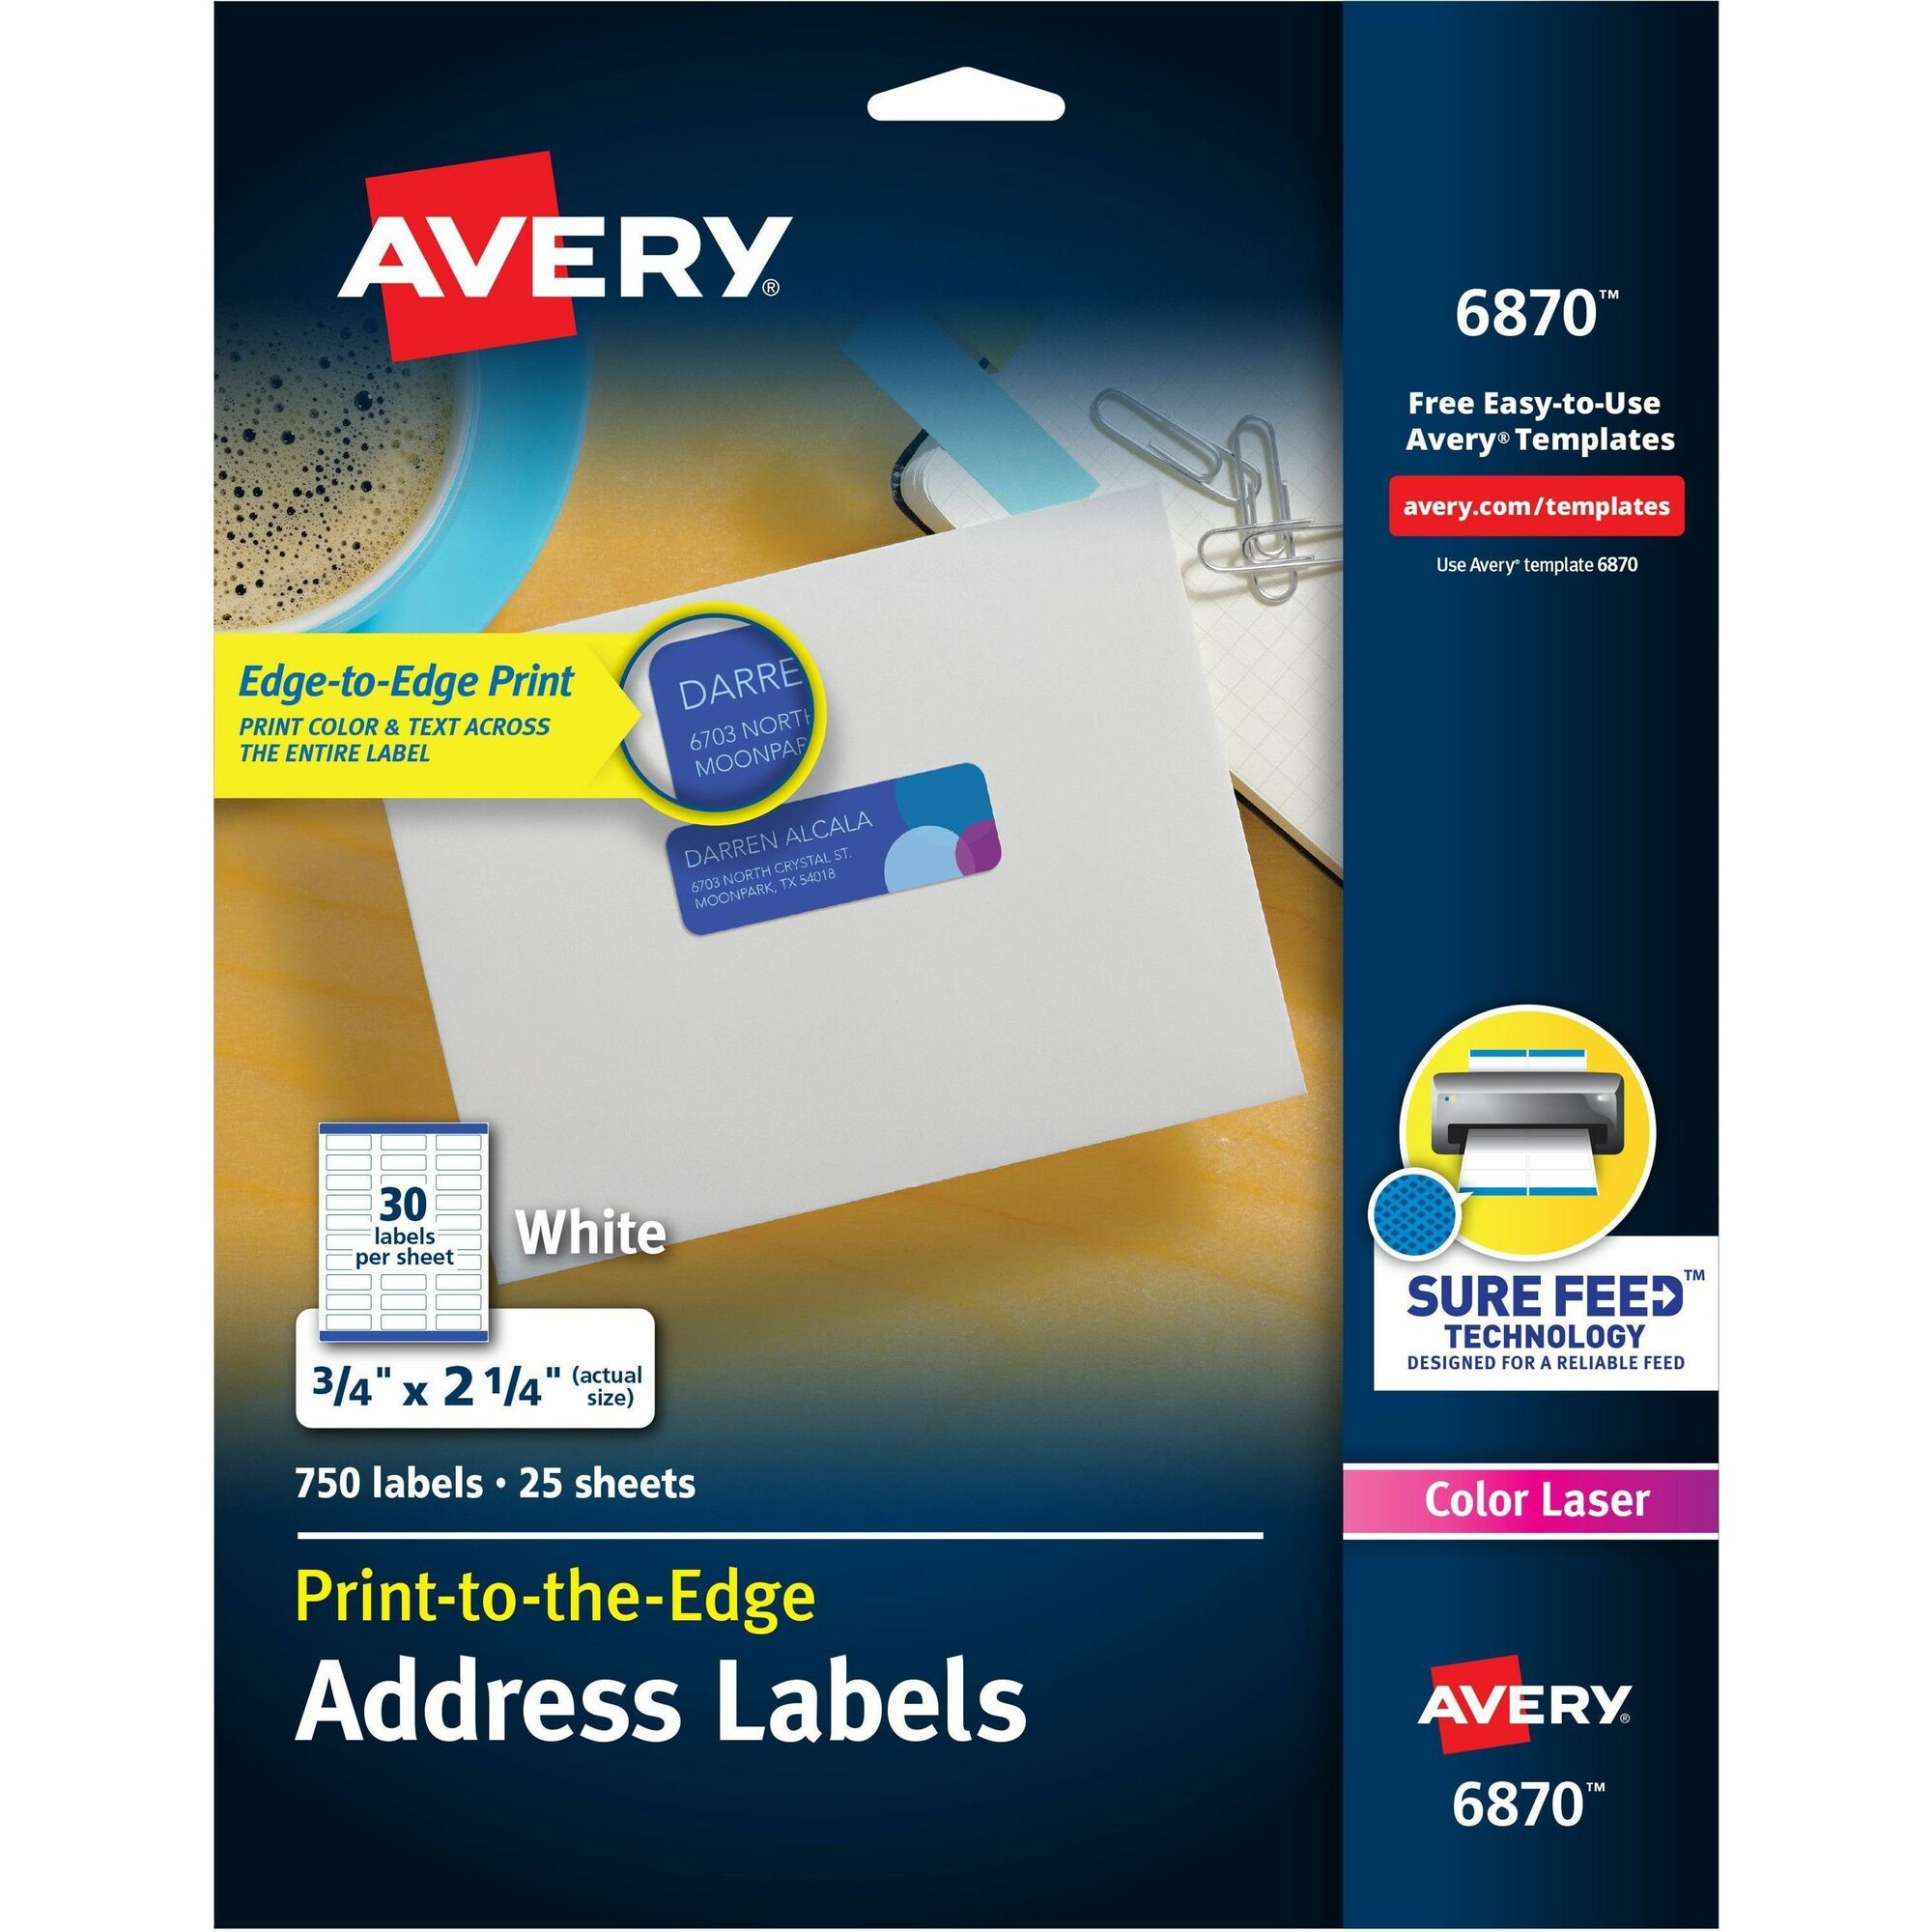 avery-6870-label-template-tutore-org-master-of-documents